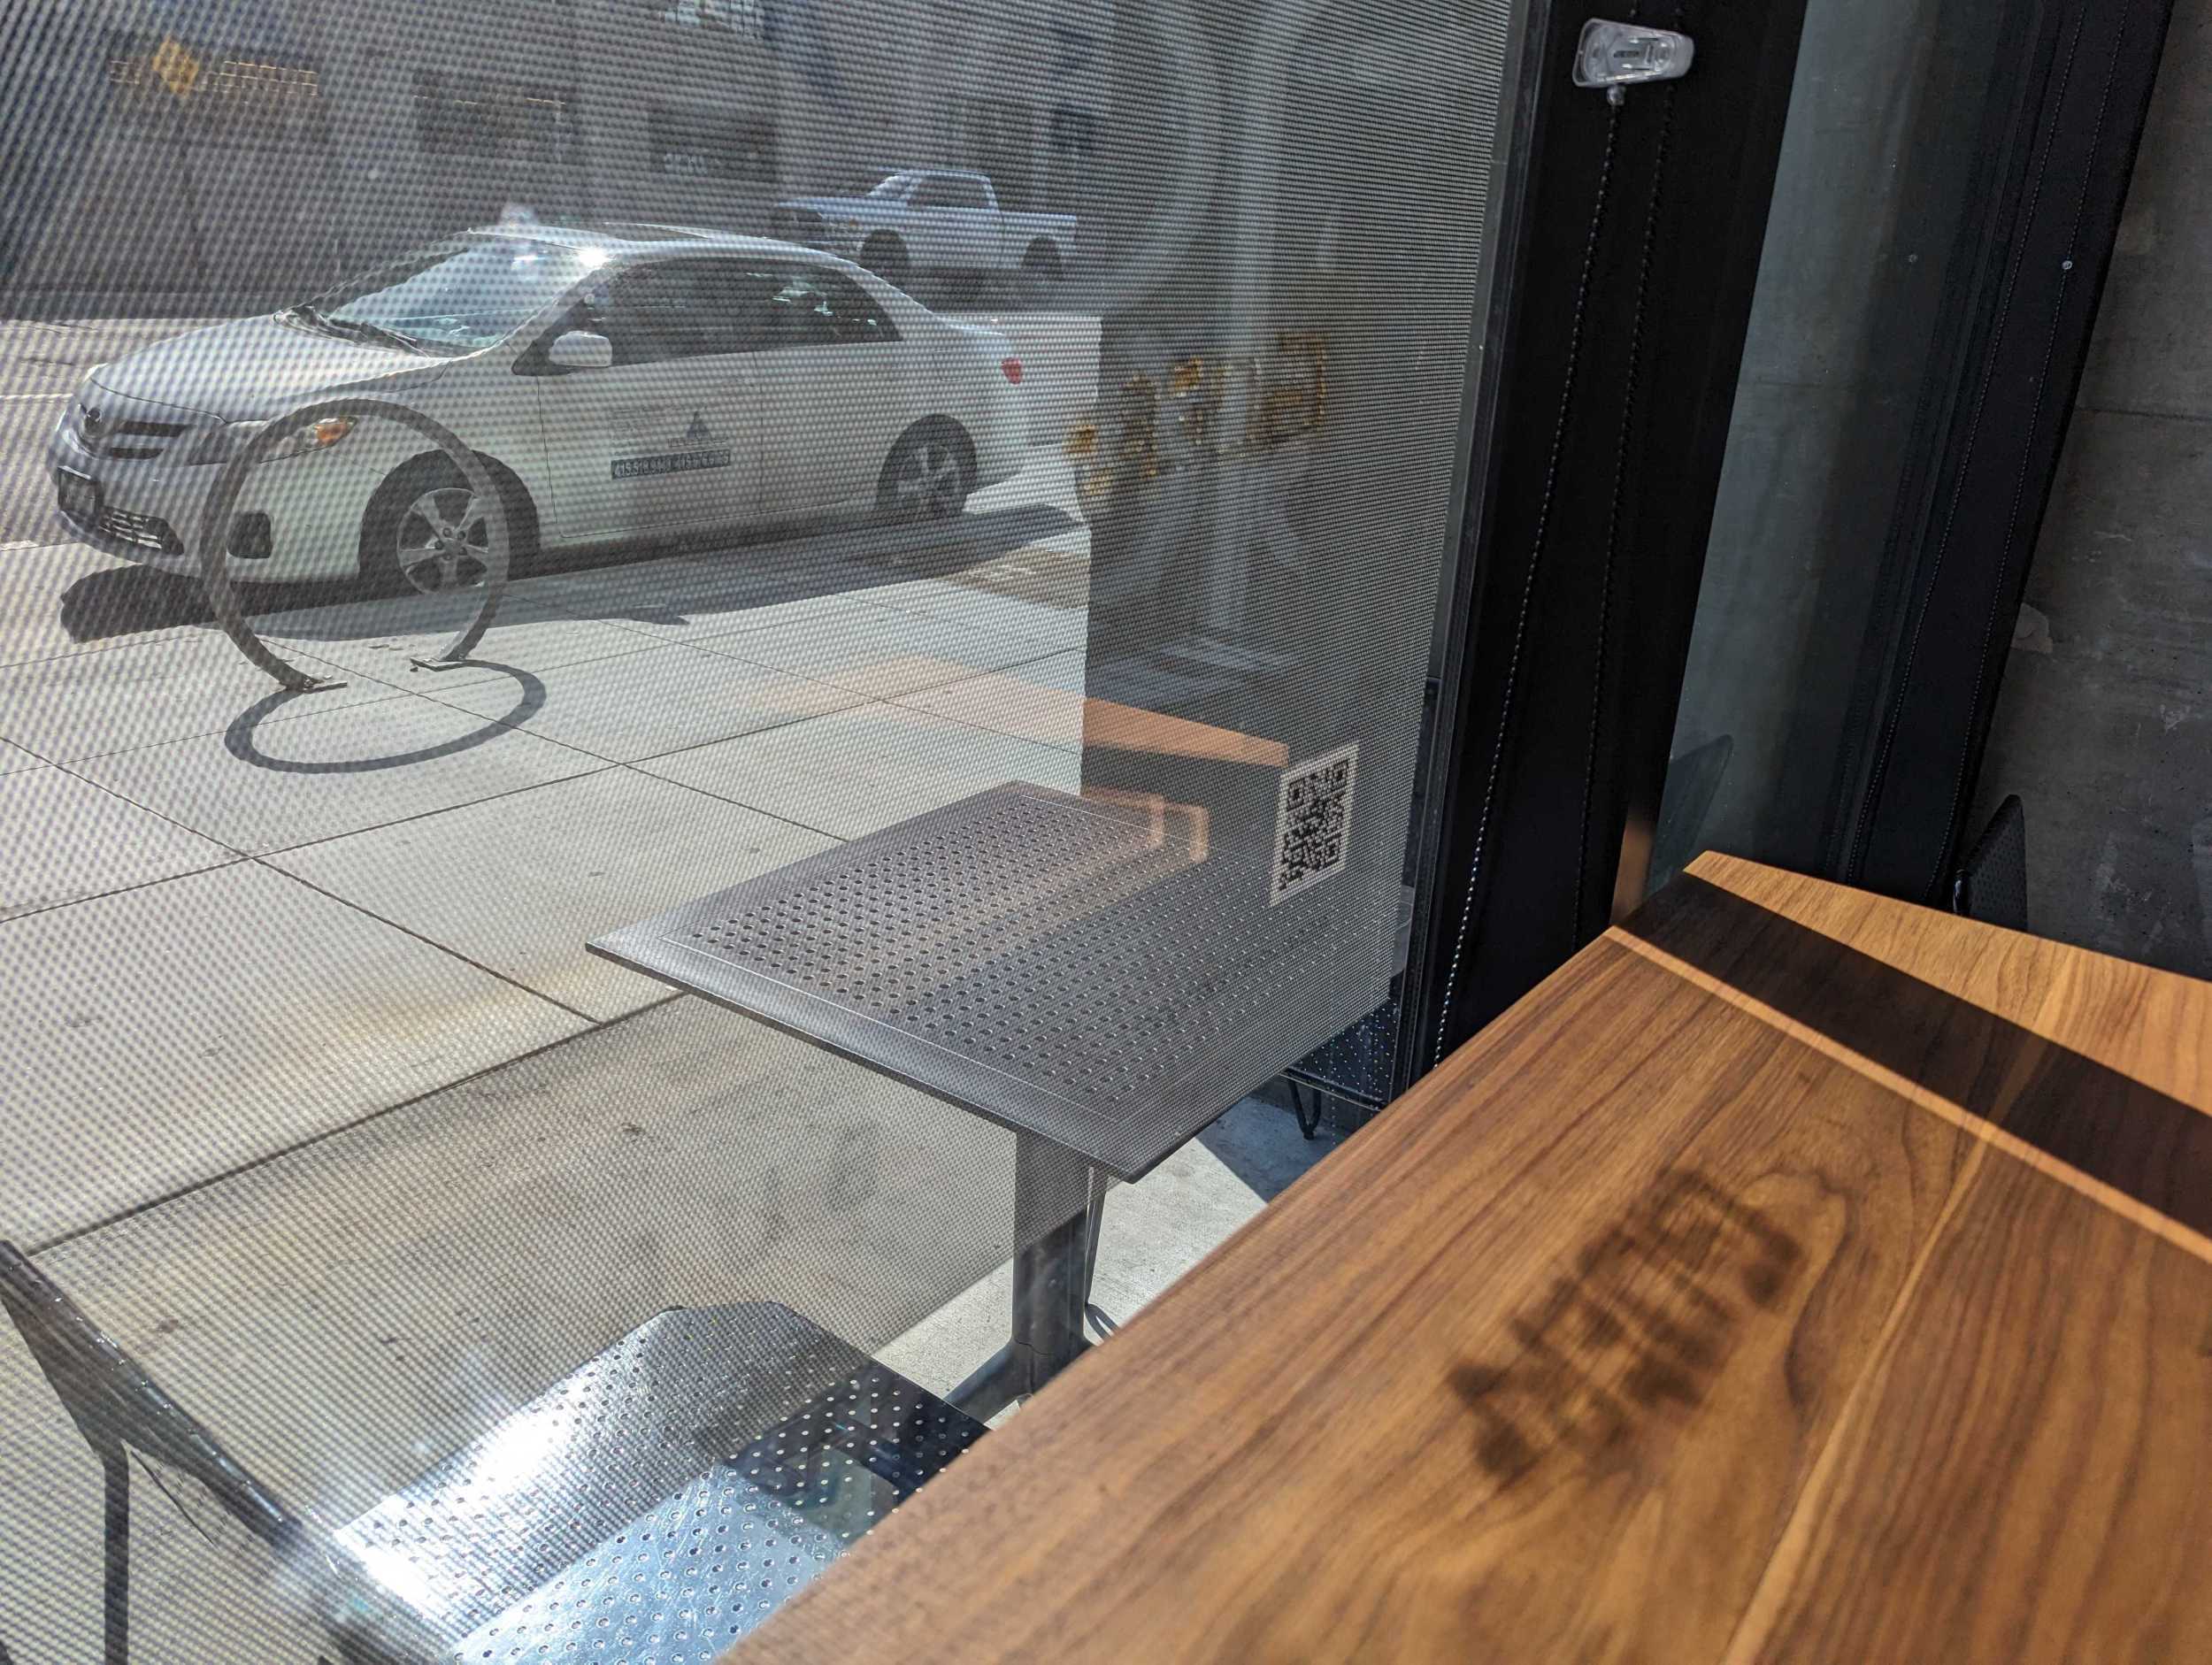 Inside the Bay of Burma restaurant on Folsom Street in San Francisco's South of Market neighborhood, midday sunlight sends the shadow of a tag singed into a front window's sticker late last month onto a wooden countertop inside.